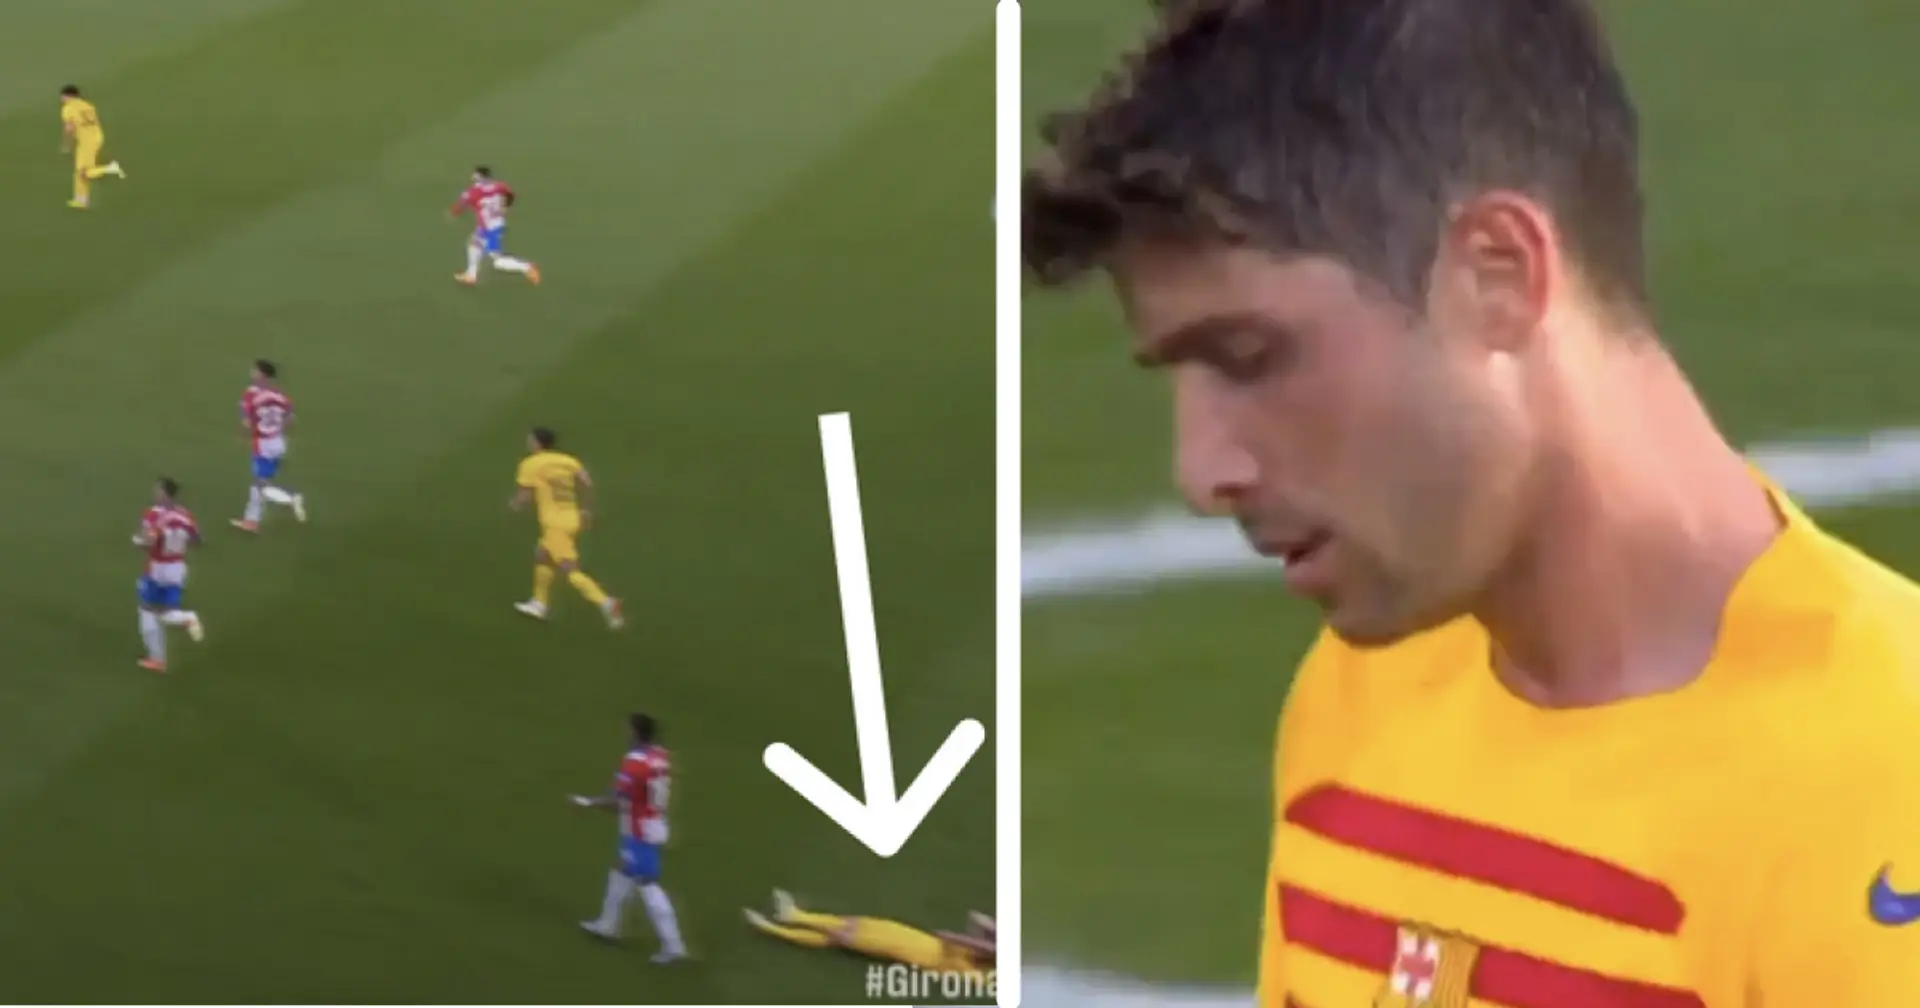 Sergi Roberto's instant reaction to his goal-leading mistake v Girona spotted